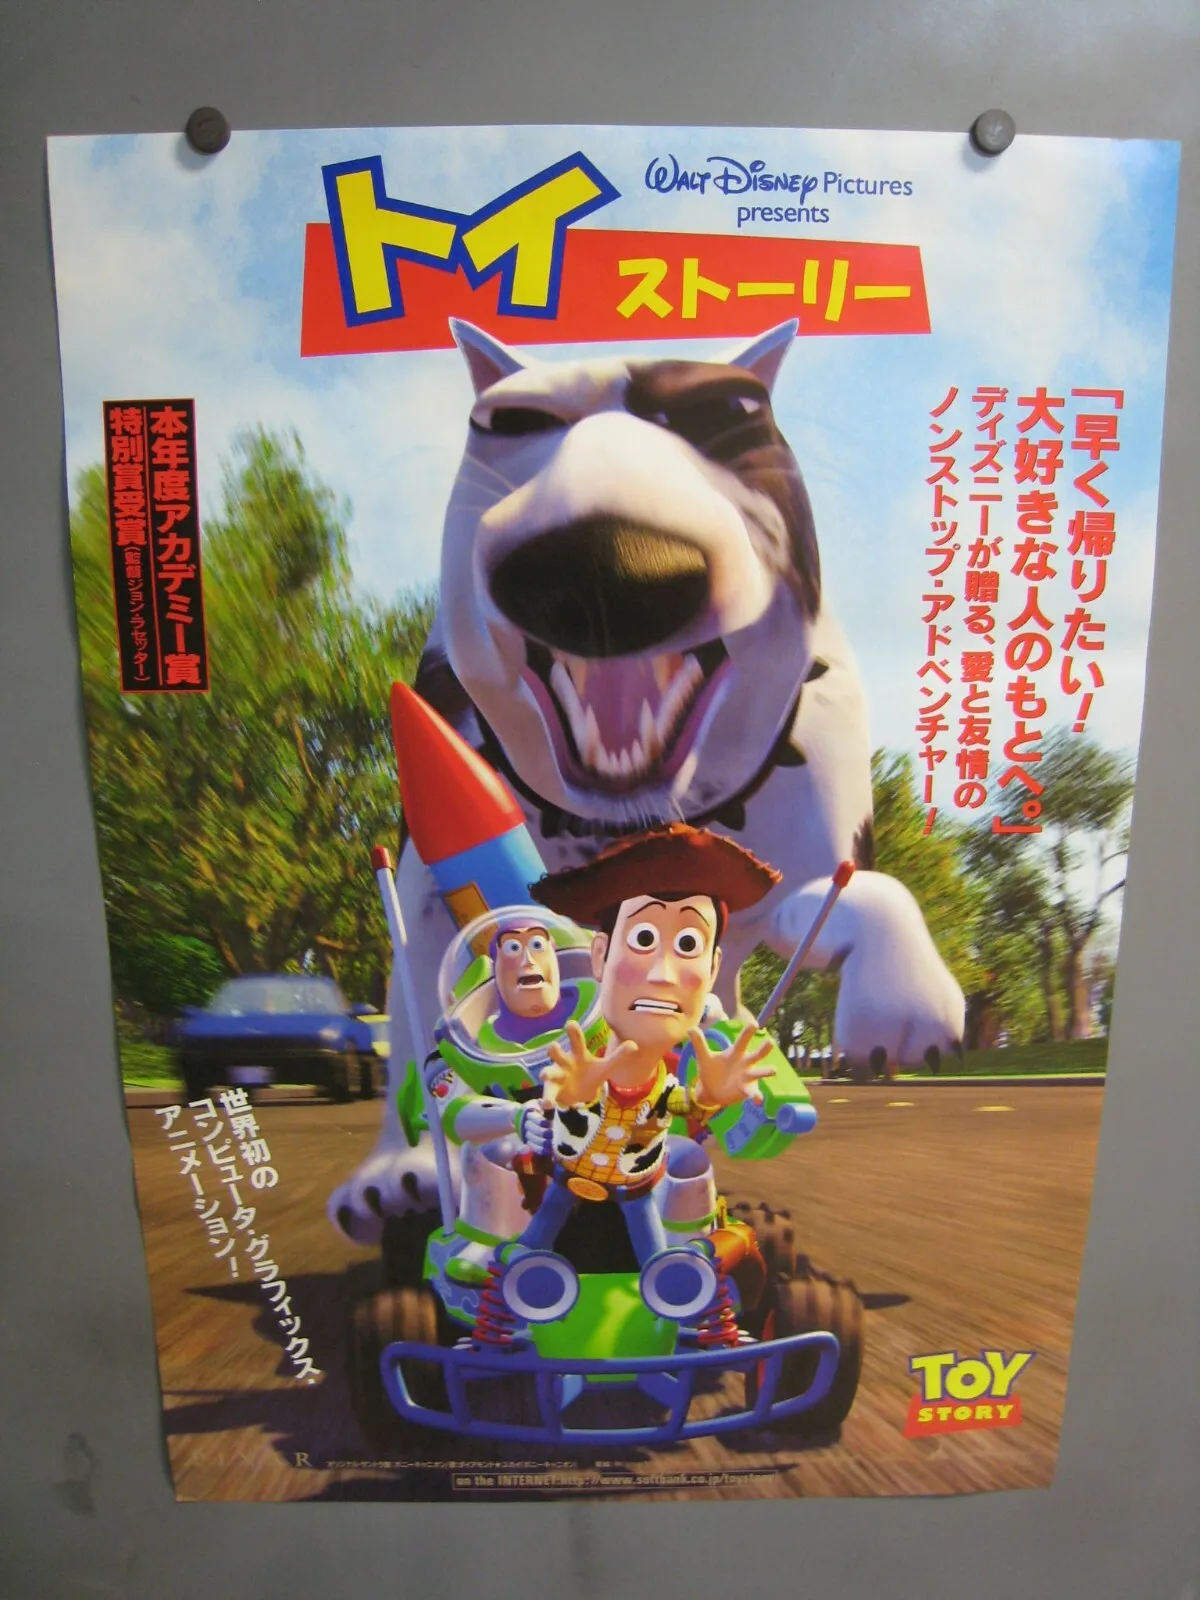 1995 Toy Story One Sheet Movie B2 Poster Japan